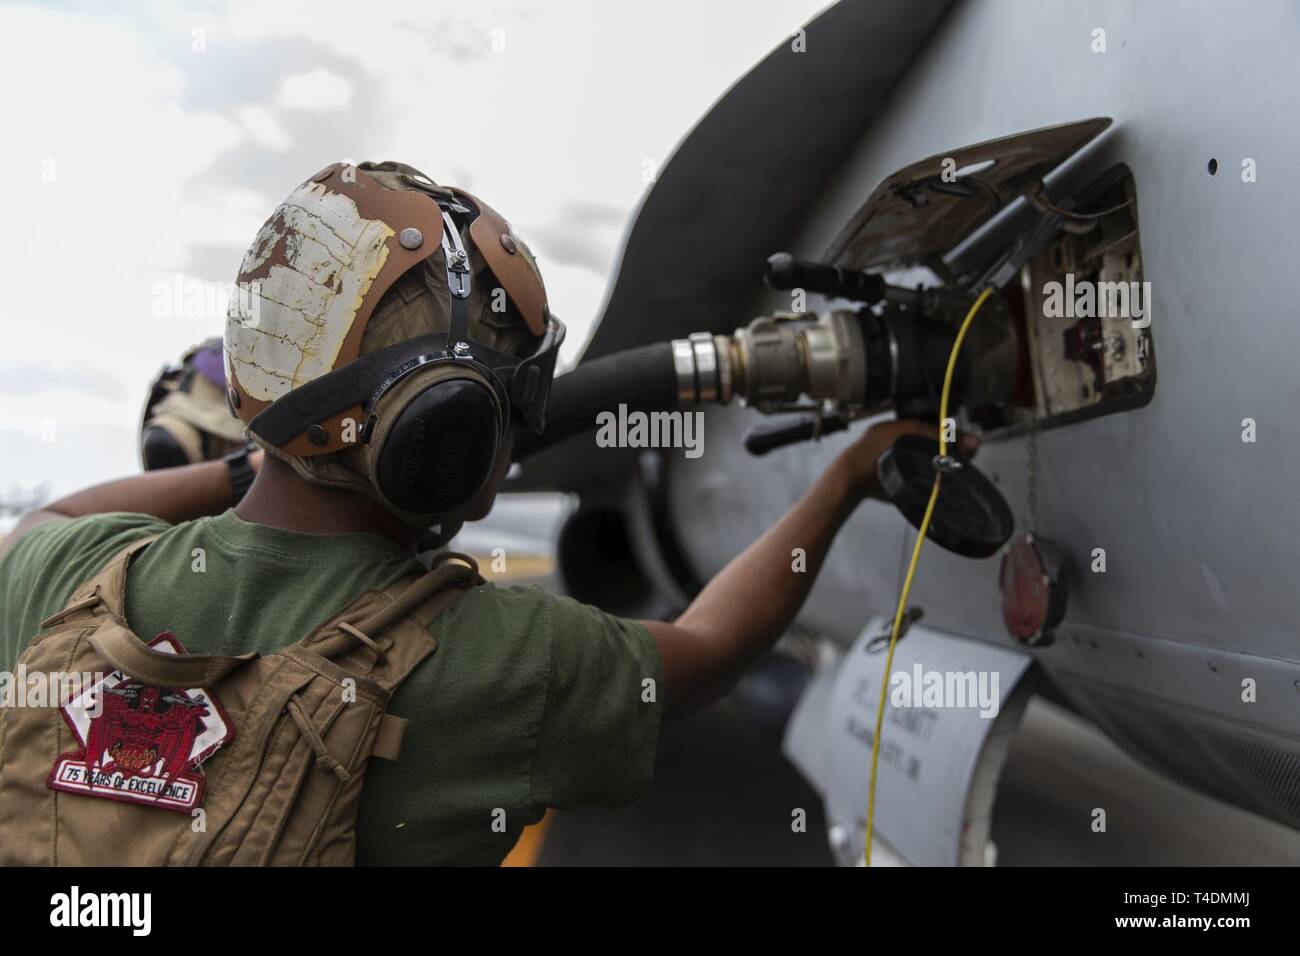 U.S. Marine Corps Lance Cpl. Daniel Vasquez refuels an F/A-18C Hornet with Marine Fighter Attack Squadron (VMFA) 232 at Clark Air Base, Philippines, April 3, 2019 during Exercise Balikatan. Balikatan is an annual exercise between the U.S. and the Philippines and comes from a Tagalog phrase meaning 'shoulder-to-shoulder,' representing the partnership between the two countries. The exercise promotes regional security and humanitarian efforts for U.S. allies and partners. Vasquez, a Fontana, California native, is an aviation mechanic with VMFA-232. Stock Photo